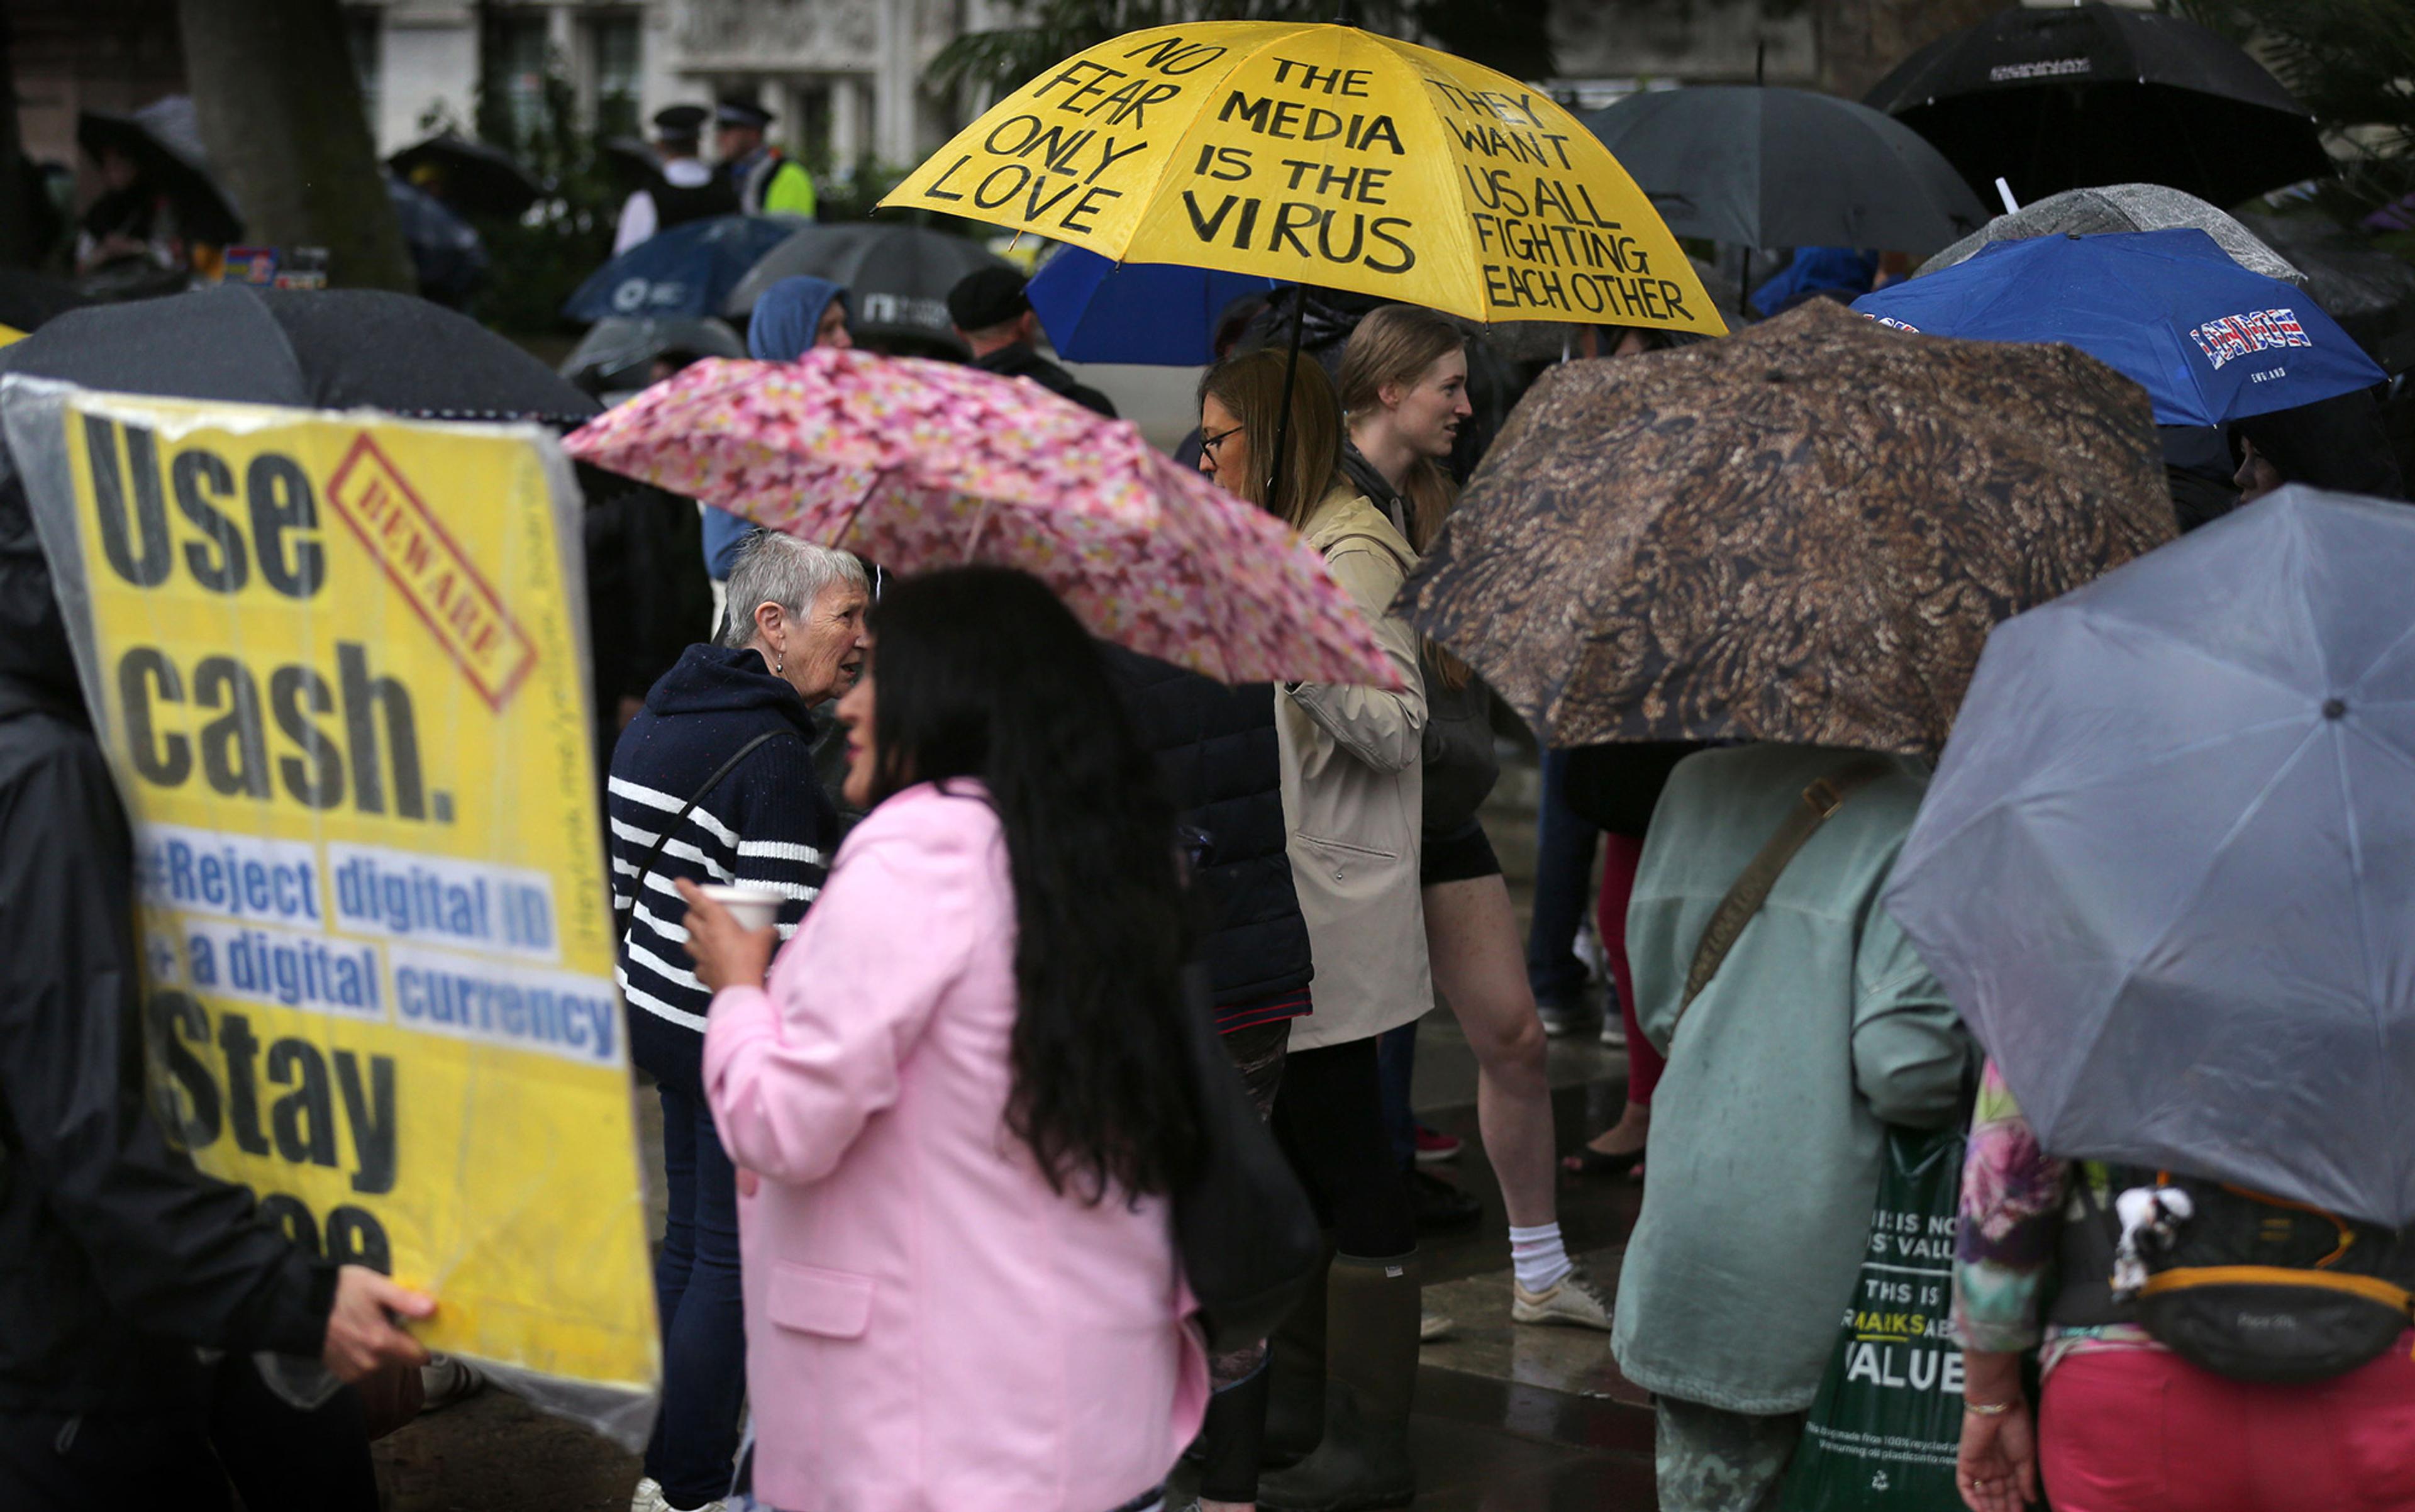 A woman in a pink coat and carrying a pink umbrella walks past a protestor carrying a yellow placard appealing to people to use cash